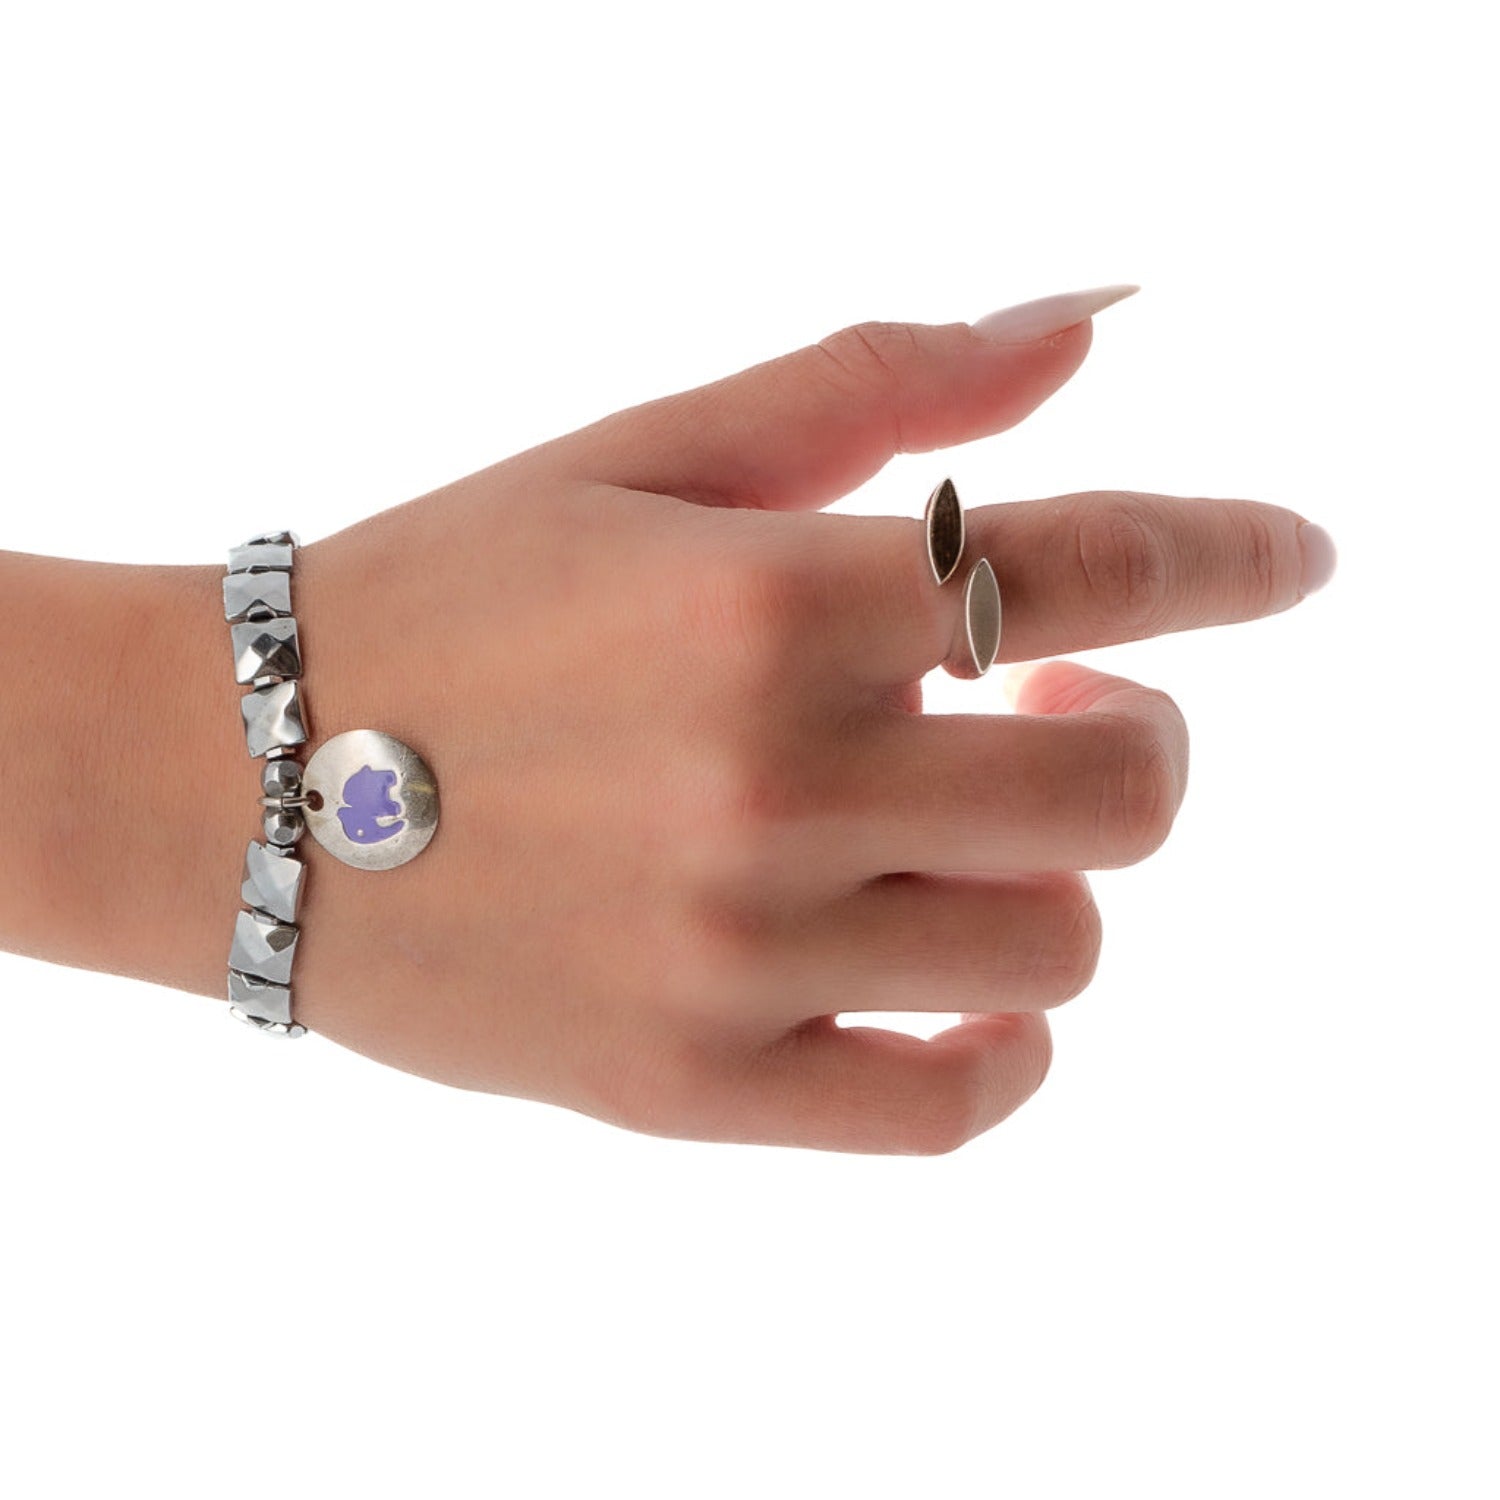 Hand model wearing the Hope Elephant Bracelet, showcasing its beauty and significance.